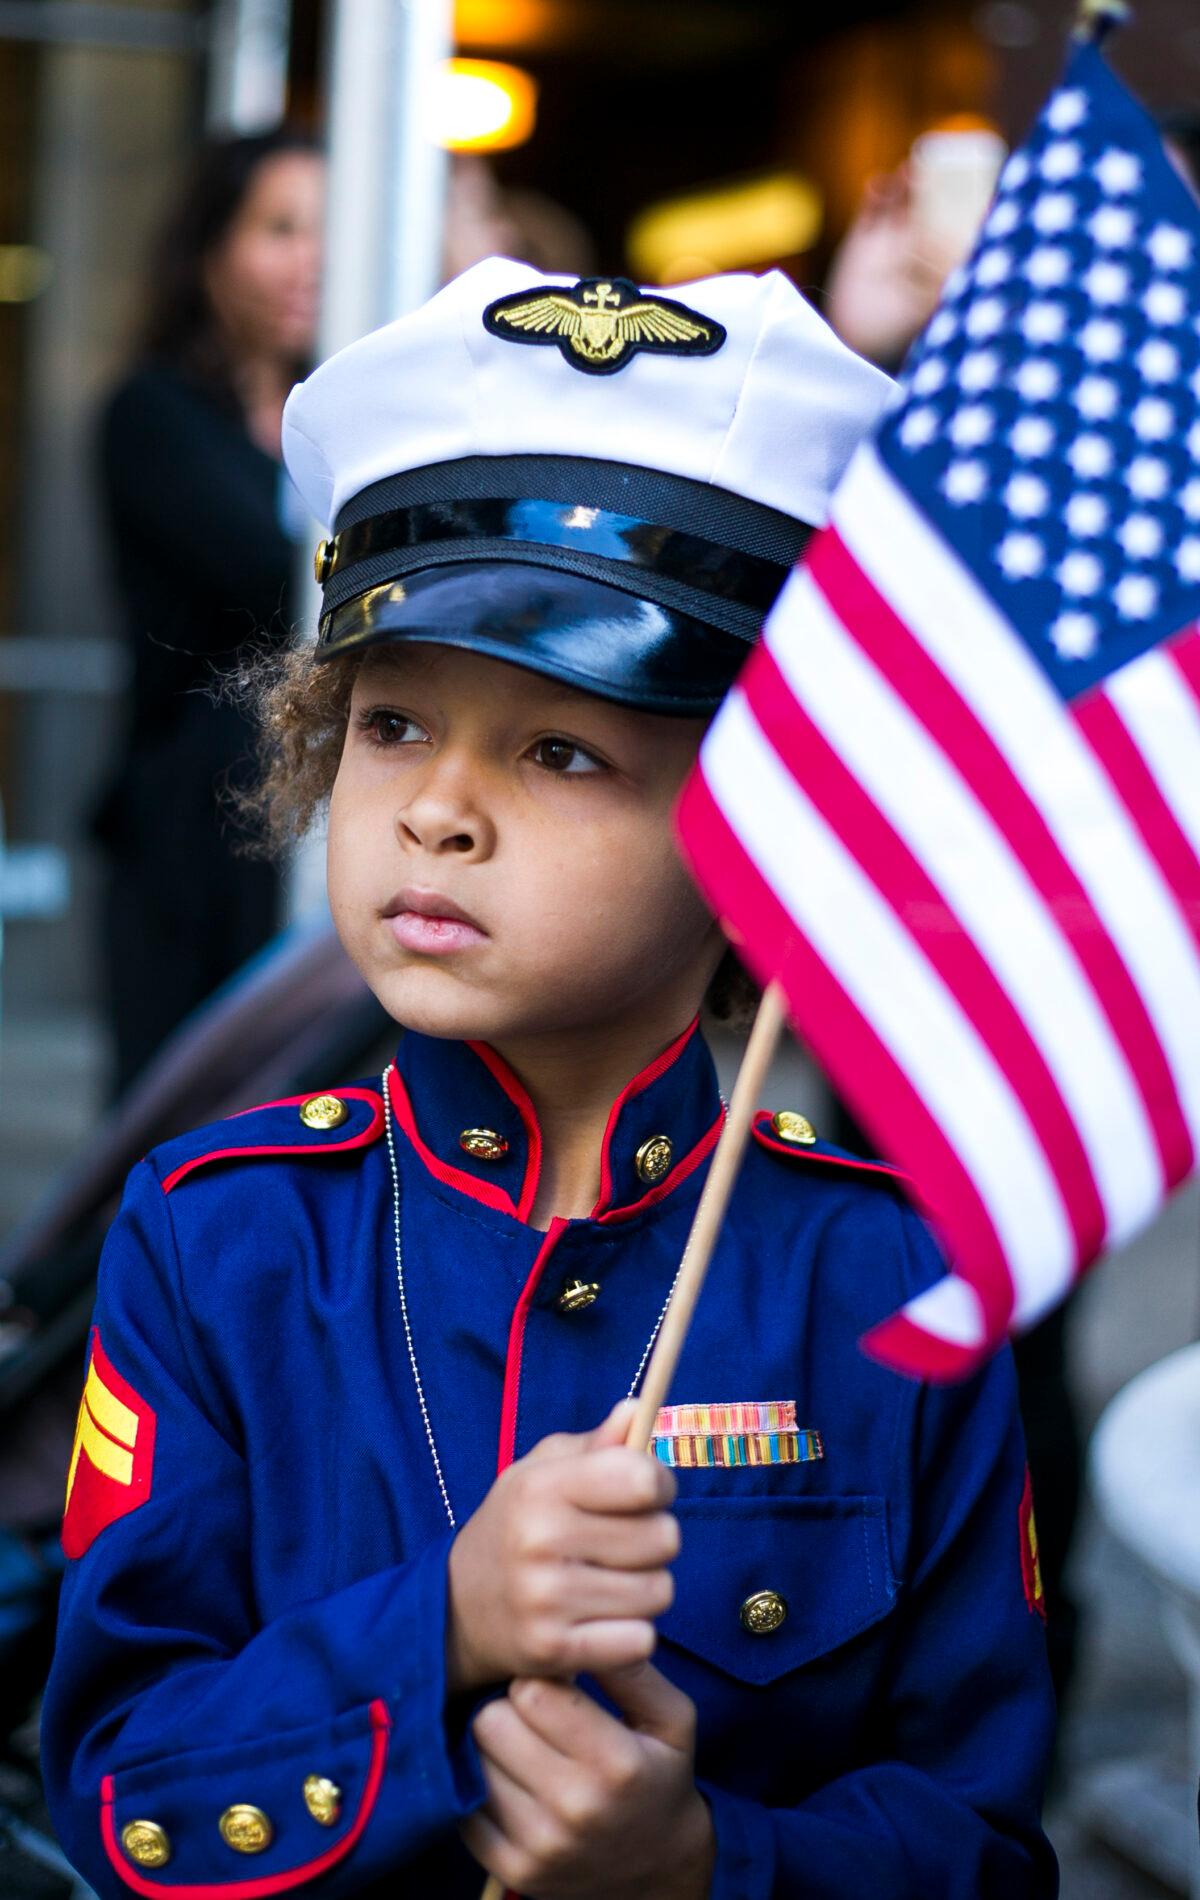 Xander Foreman, 6, at the New York Veterans' Day Parade in Manhattan, N.Y., on Nov. 11, 2014. (Samira Bouaou/The Epoch Times)